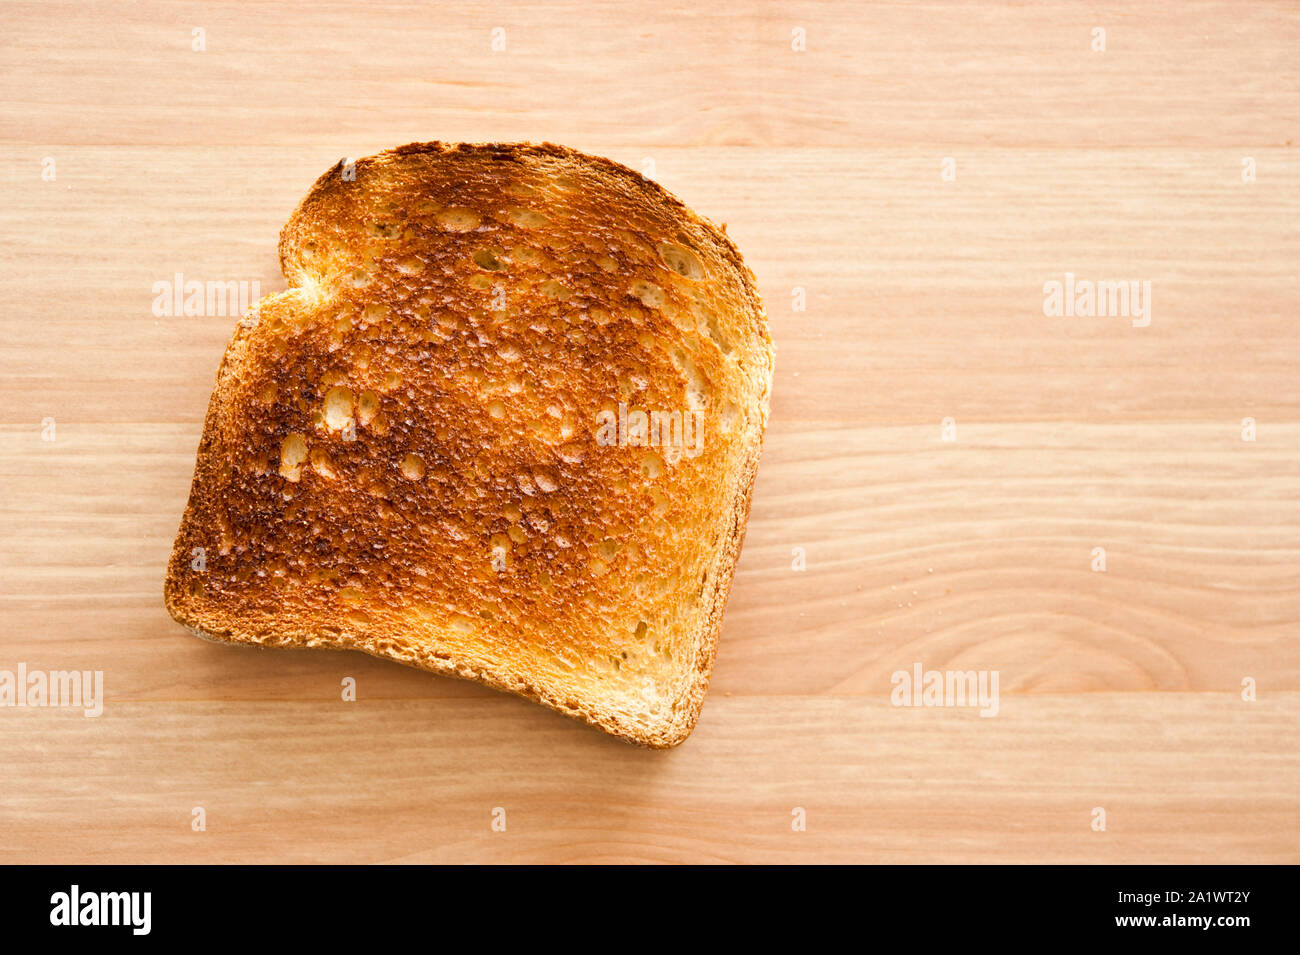 a slice of toast bread browned Stock Photo